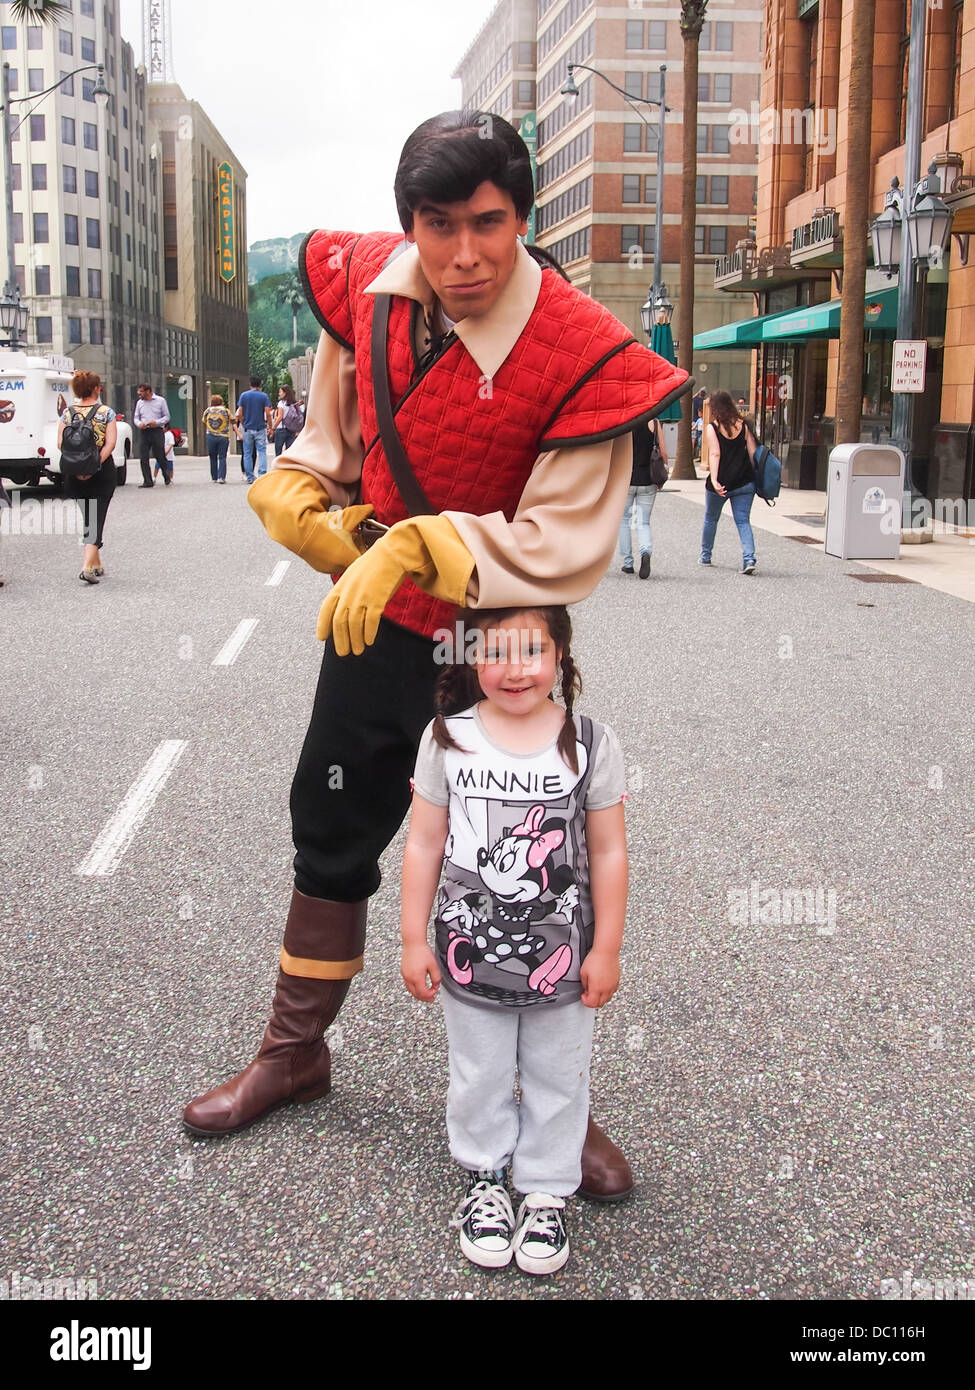 Gaston from the movie Beauty and the Beast leans poses with a young girl at Disneyland Paris in France Stock Photo